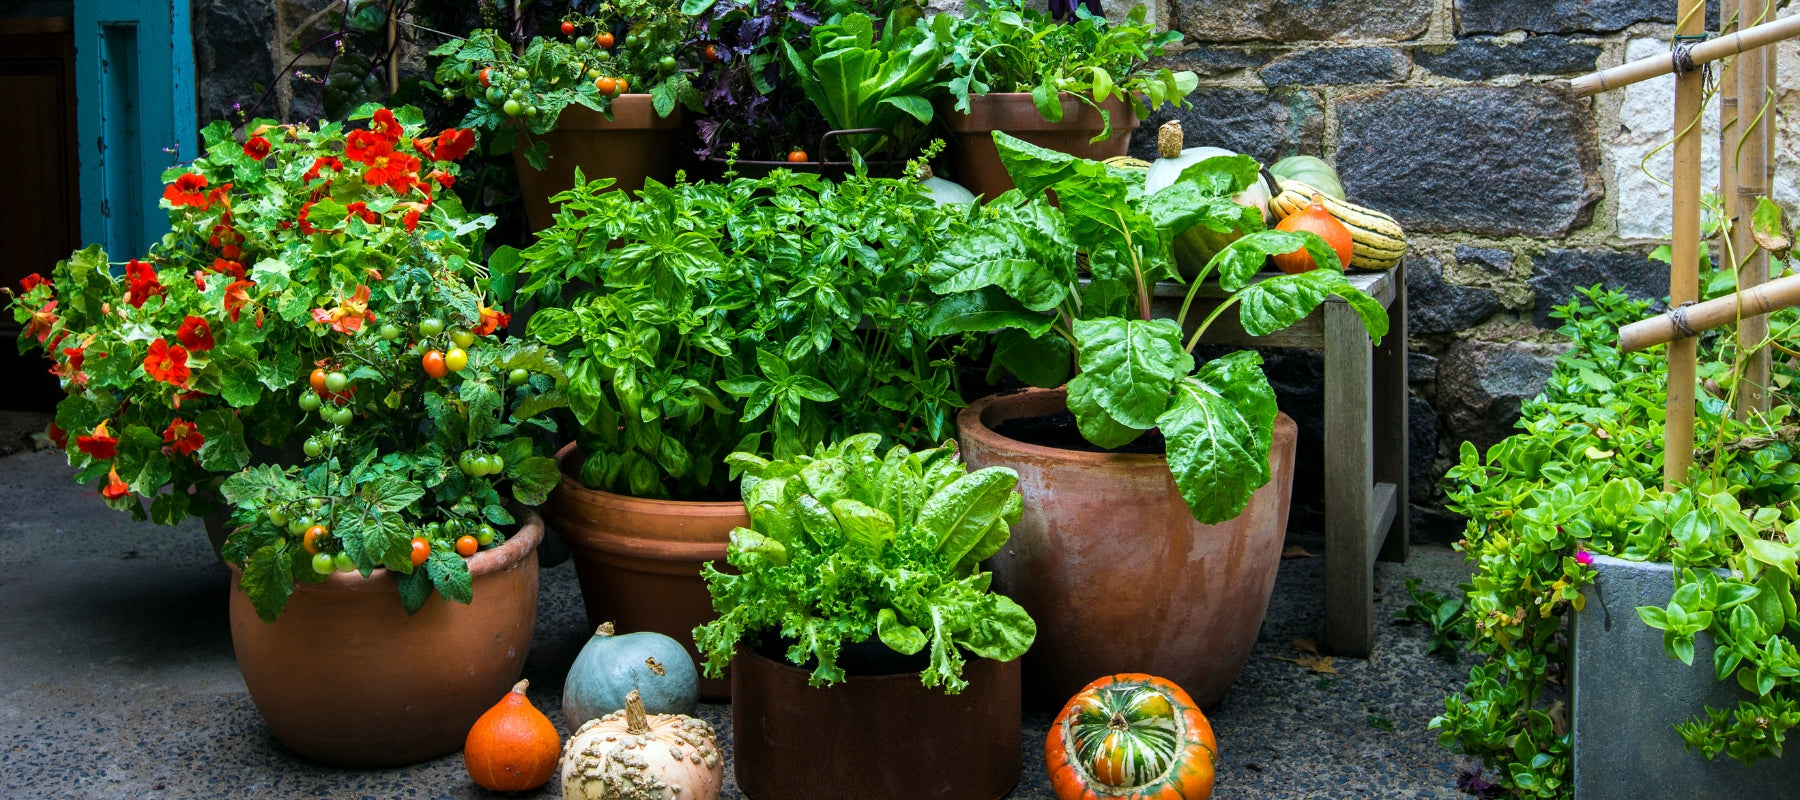 Gardening in Small Spaces: Video